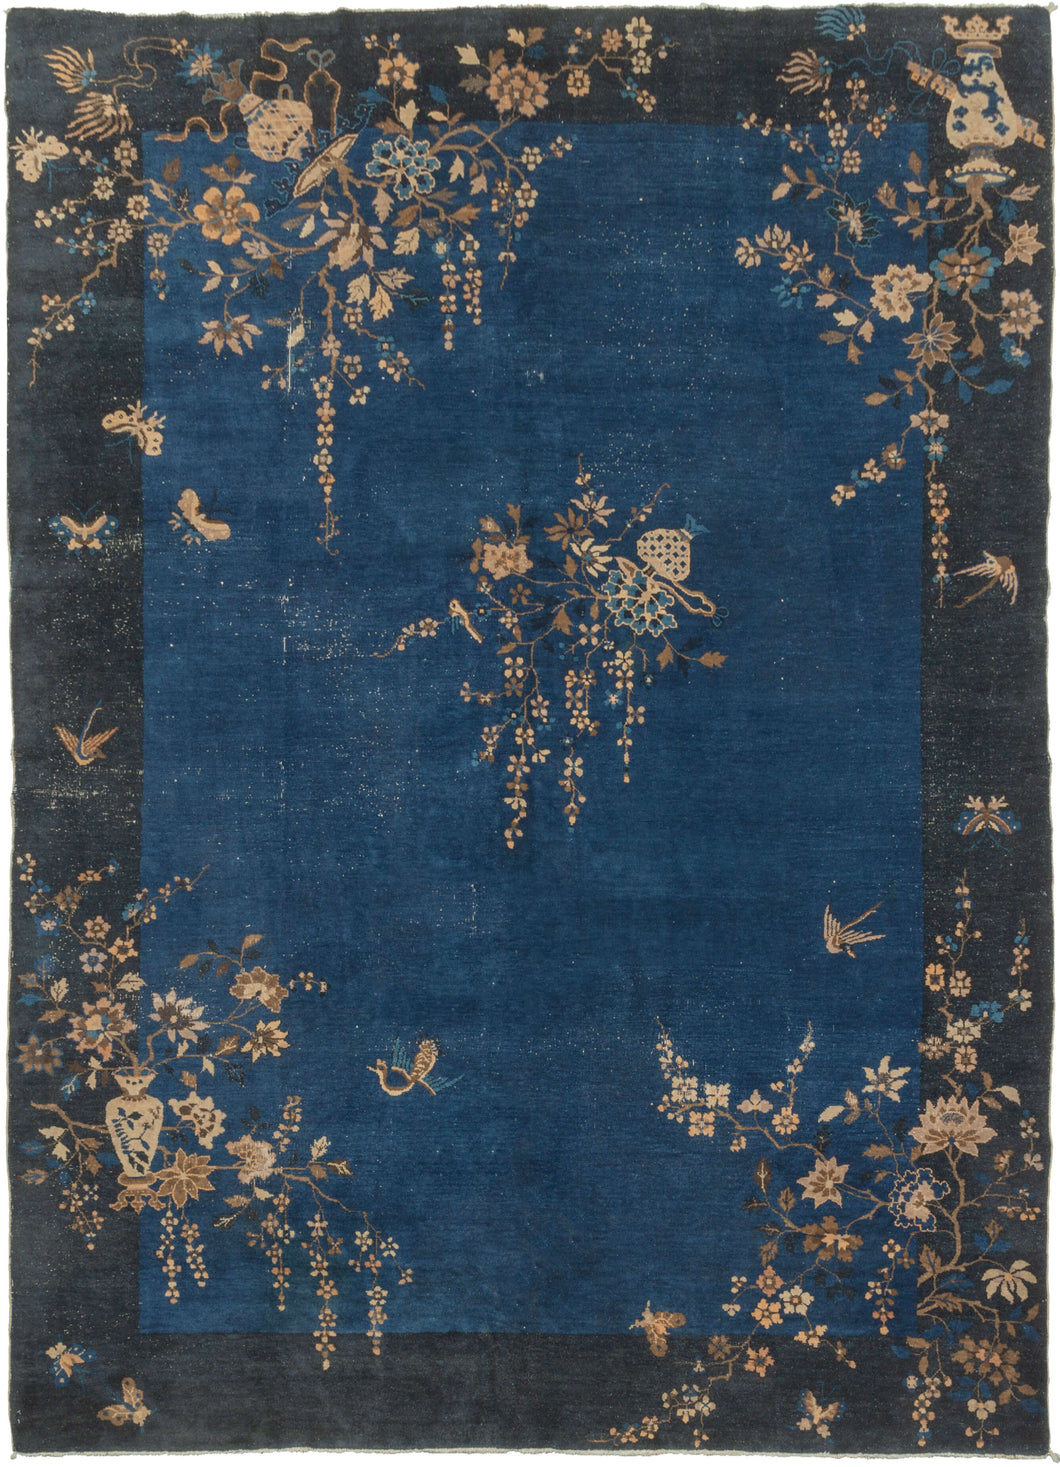 This Deco rug was handwoven in Eastern China during the second quarter of the 20th century.  It features an open indigo field framed by a wide navy border. Flowering vases and branches that start in the border grow freely into the field unrestrained. A flower filled vase with a bird perched on one of its branches can be found near the center of the composition. Various birds and butterflies can also be seen frolicking amongst the flowers